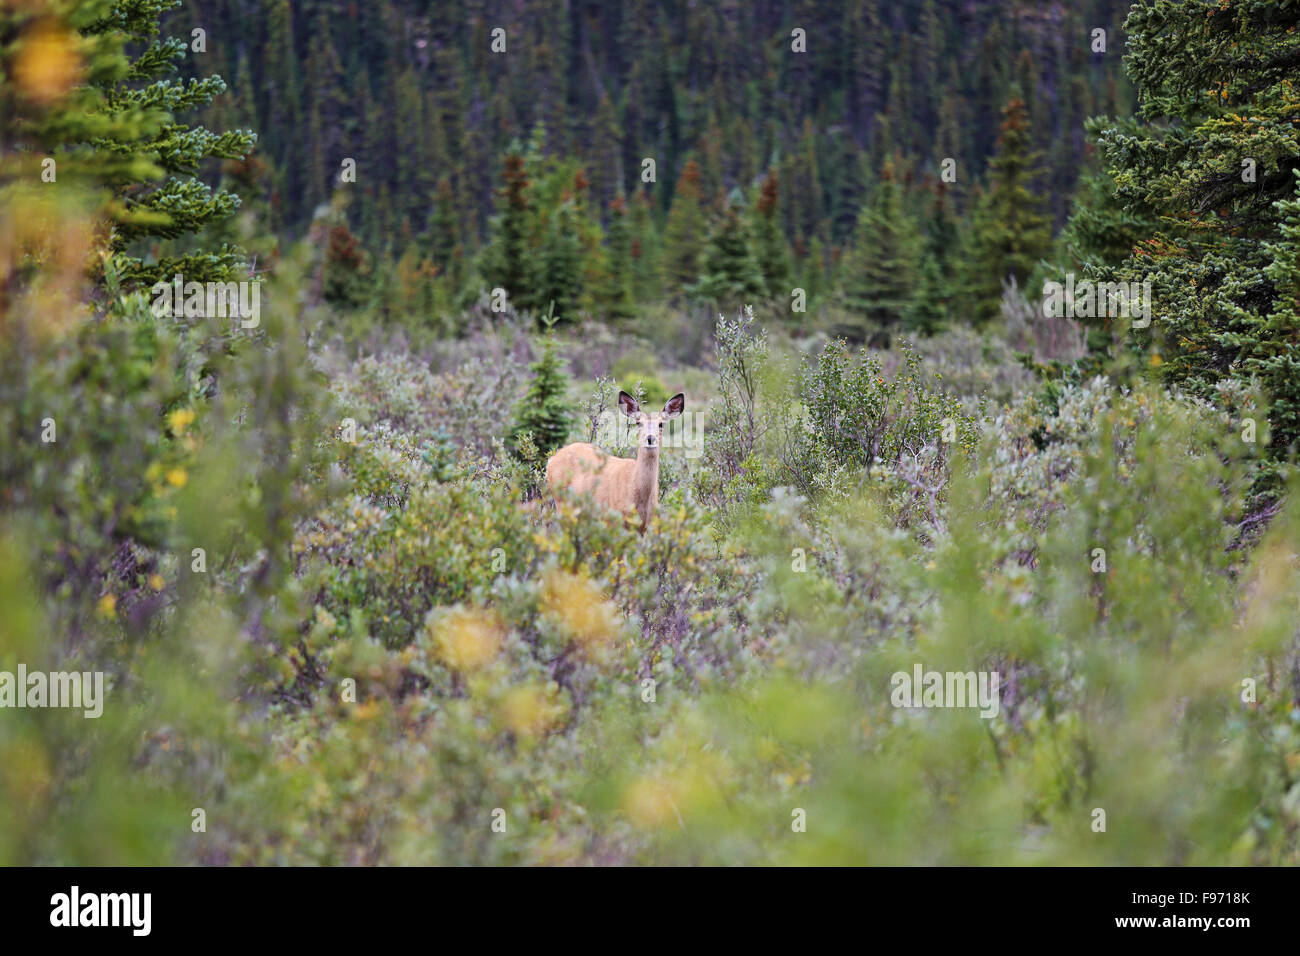 Deer peaking through a clearing in Mt. Robson park, British Columbia, Canada Stock Photo